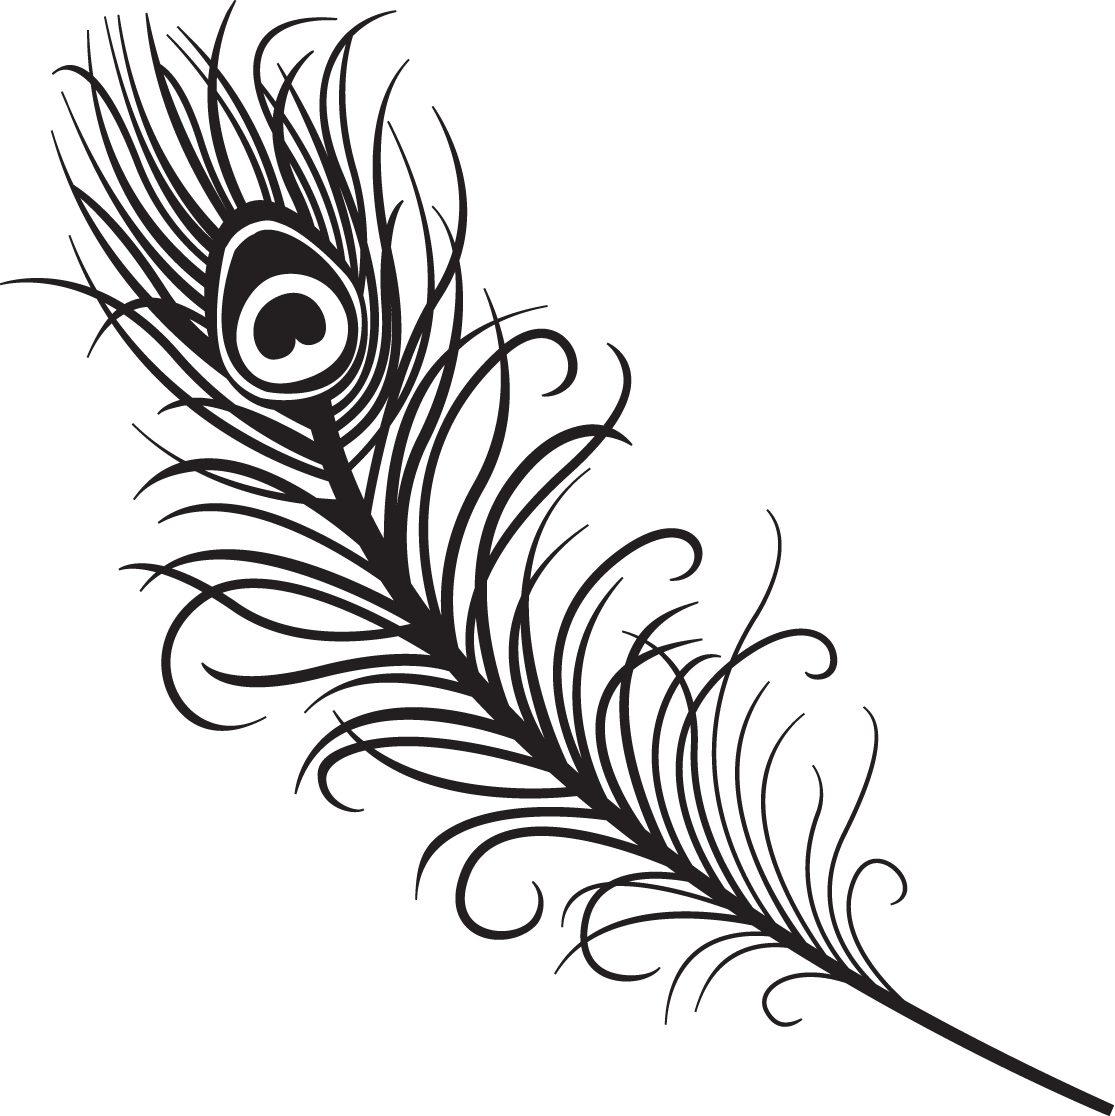 Clipart free feather. Peacock black and white